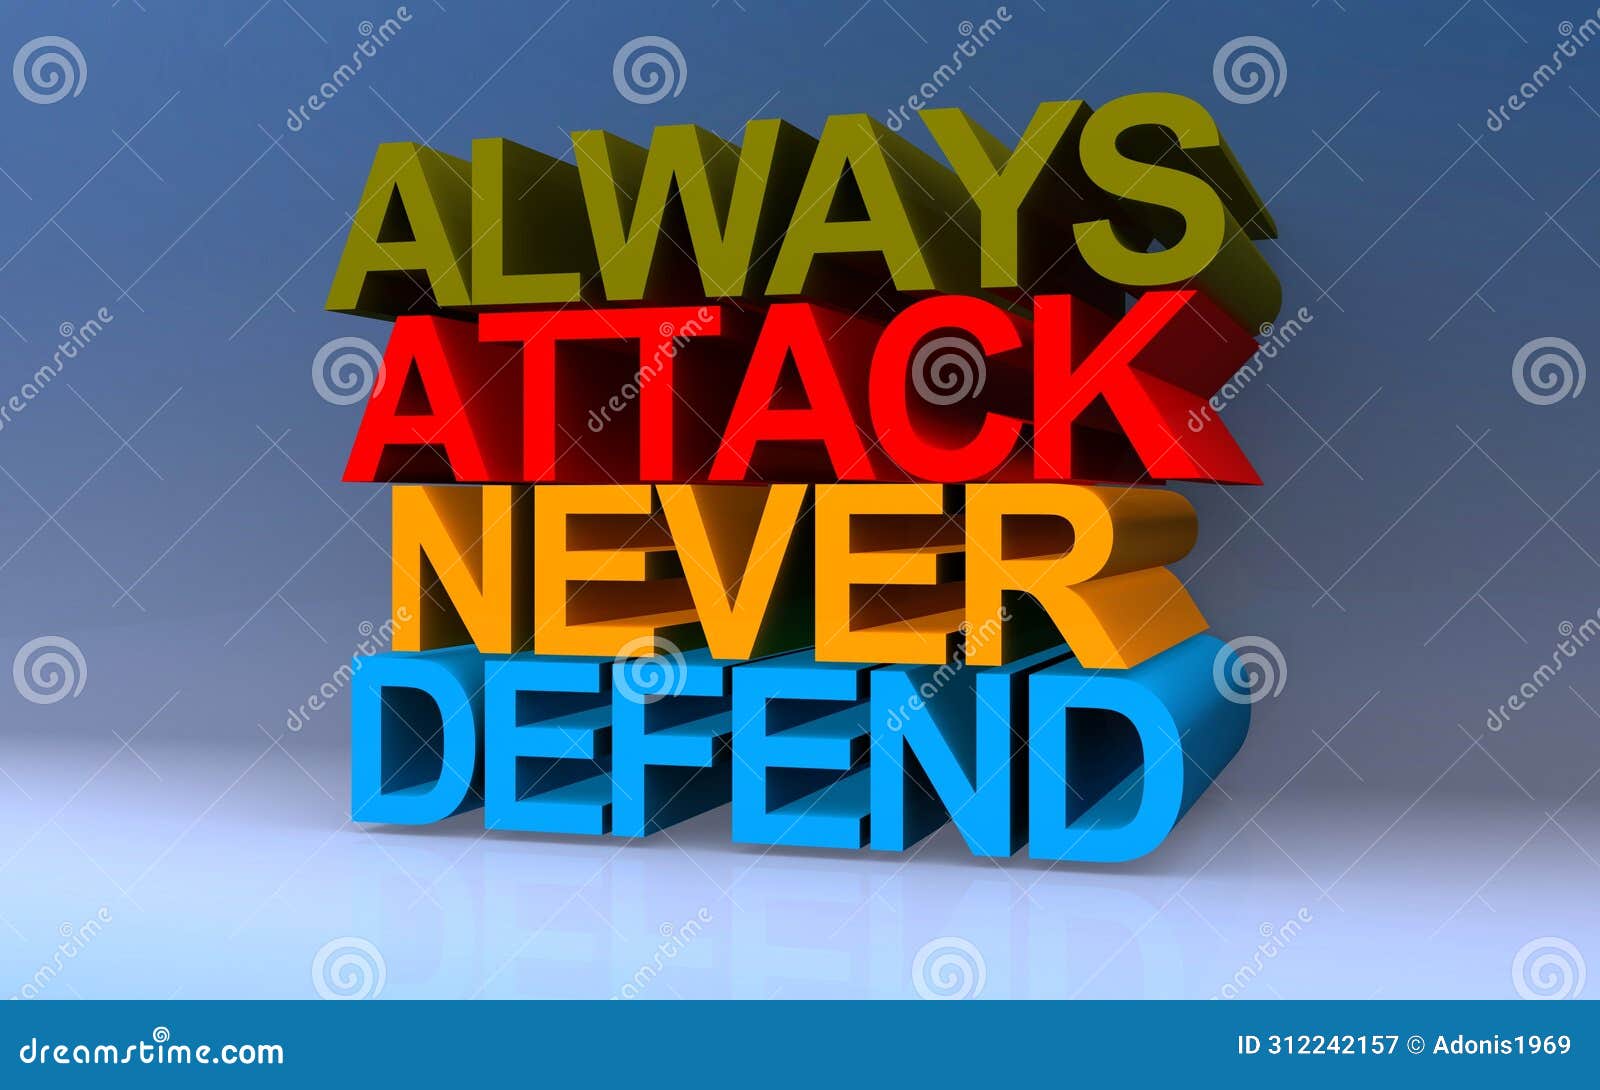 always attack never defend on blue